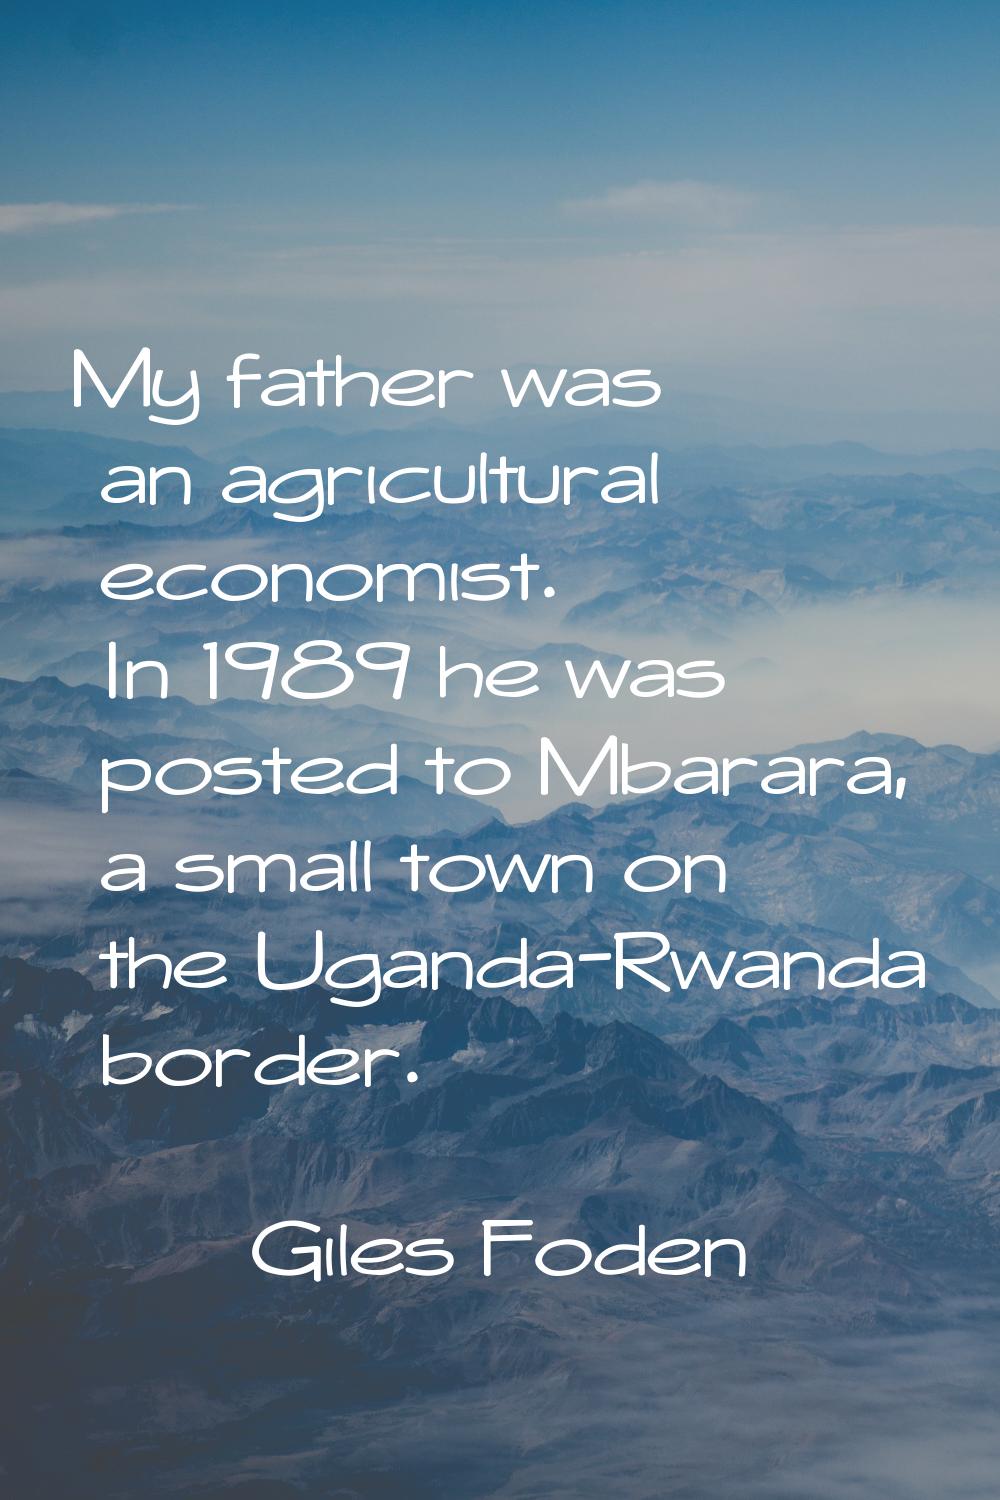 My father was an agricultural economist. In 1989 he was posted to Mbarara, a small town on the Ugan